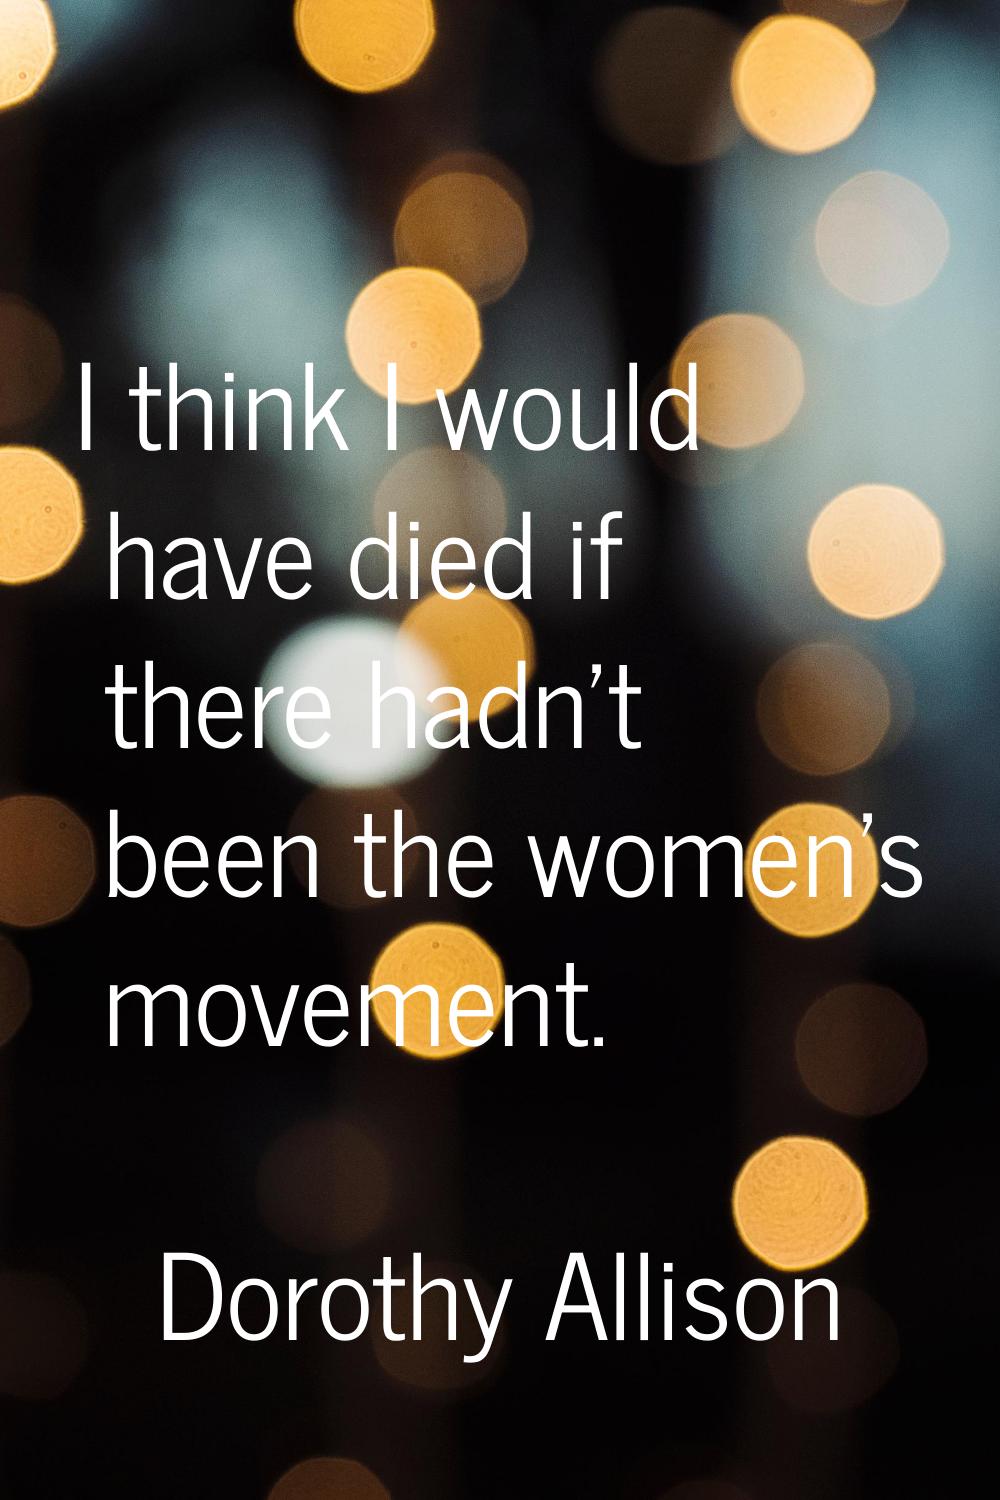 I think I would have died if there hadn't been the women's movement.